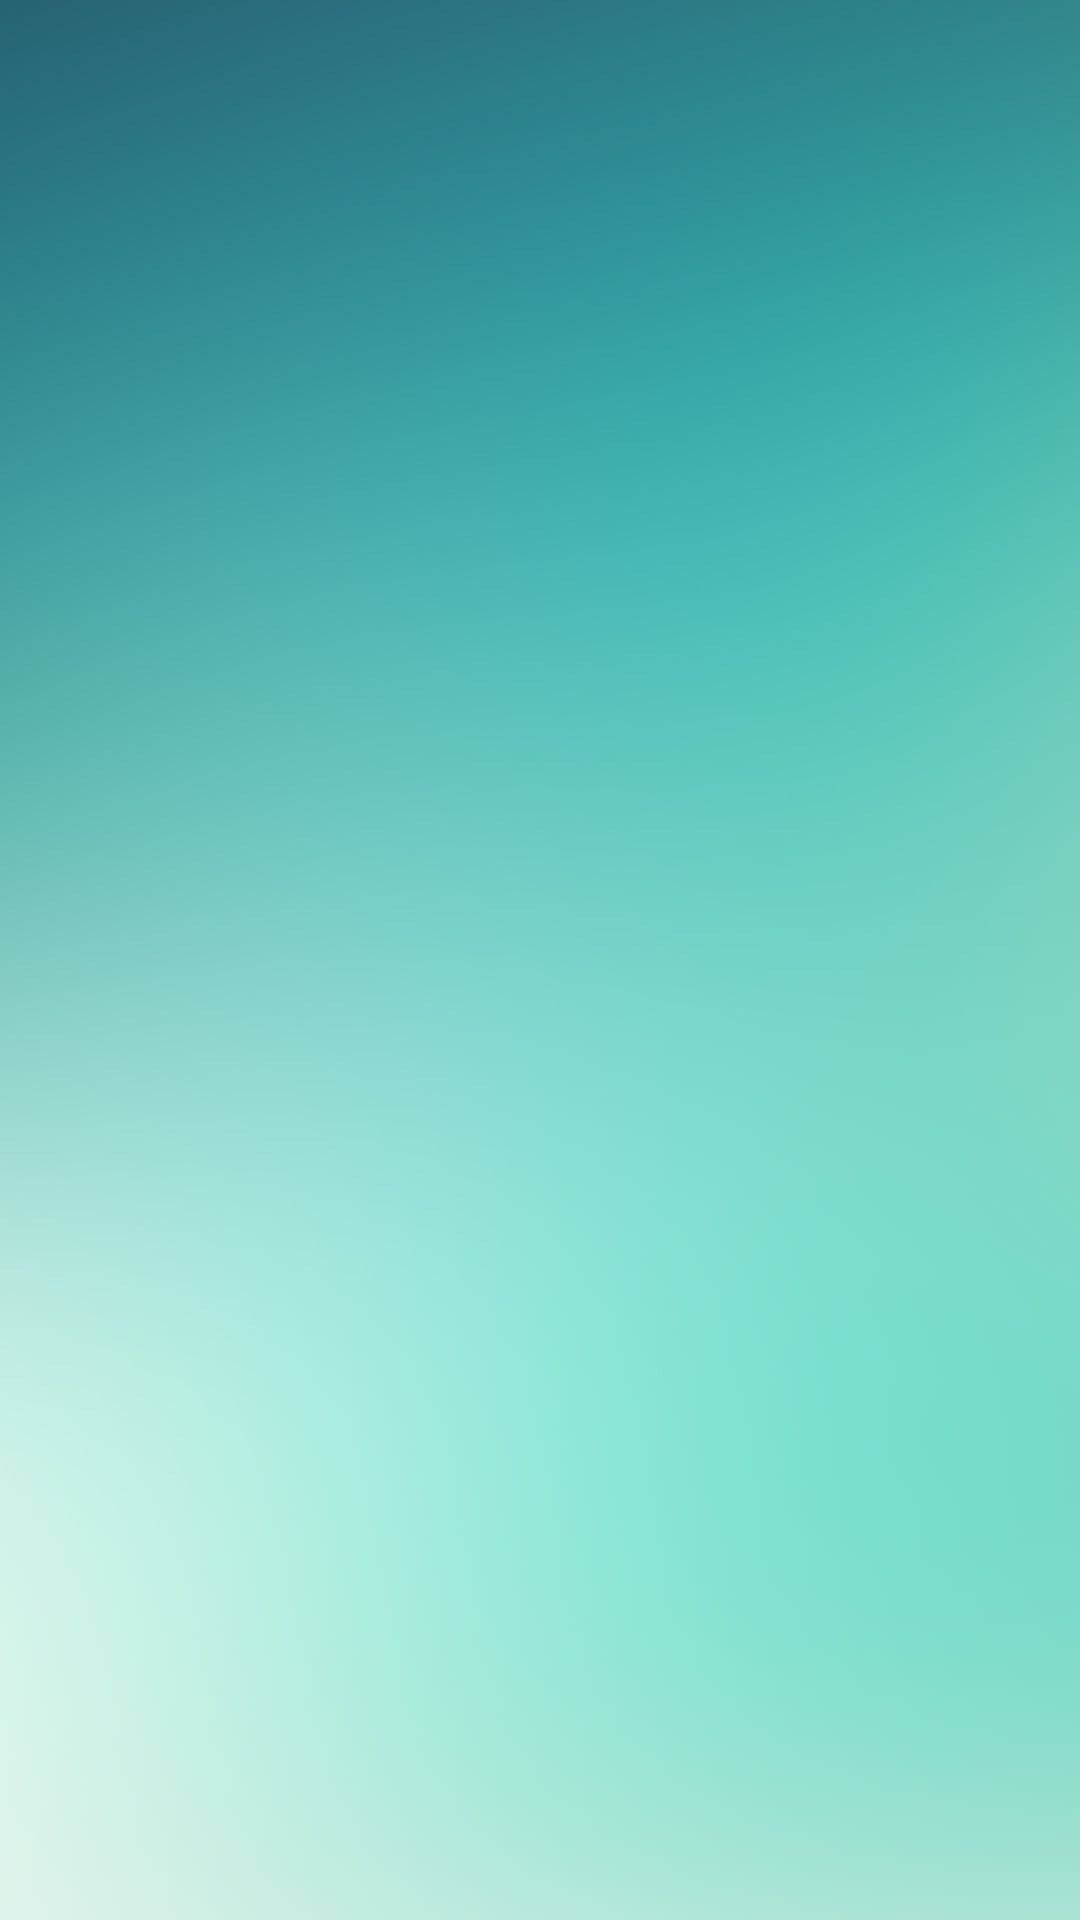 Cyan And Turquoise Color Iphone Background